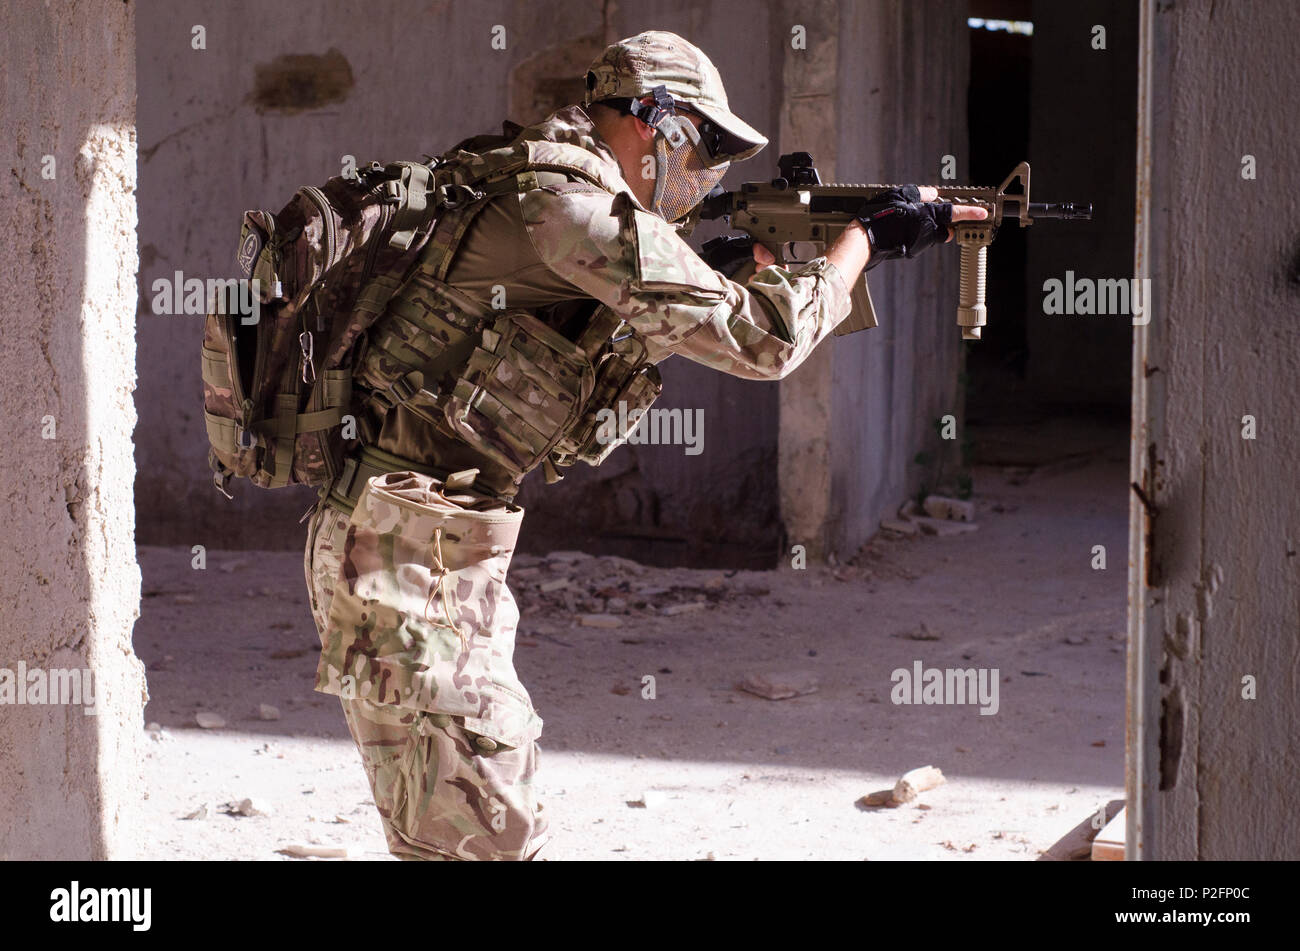 Special forces soldier inside building aim target rifle Stock Photo